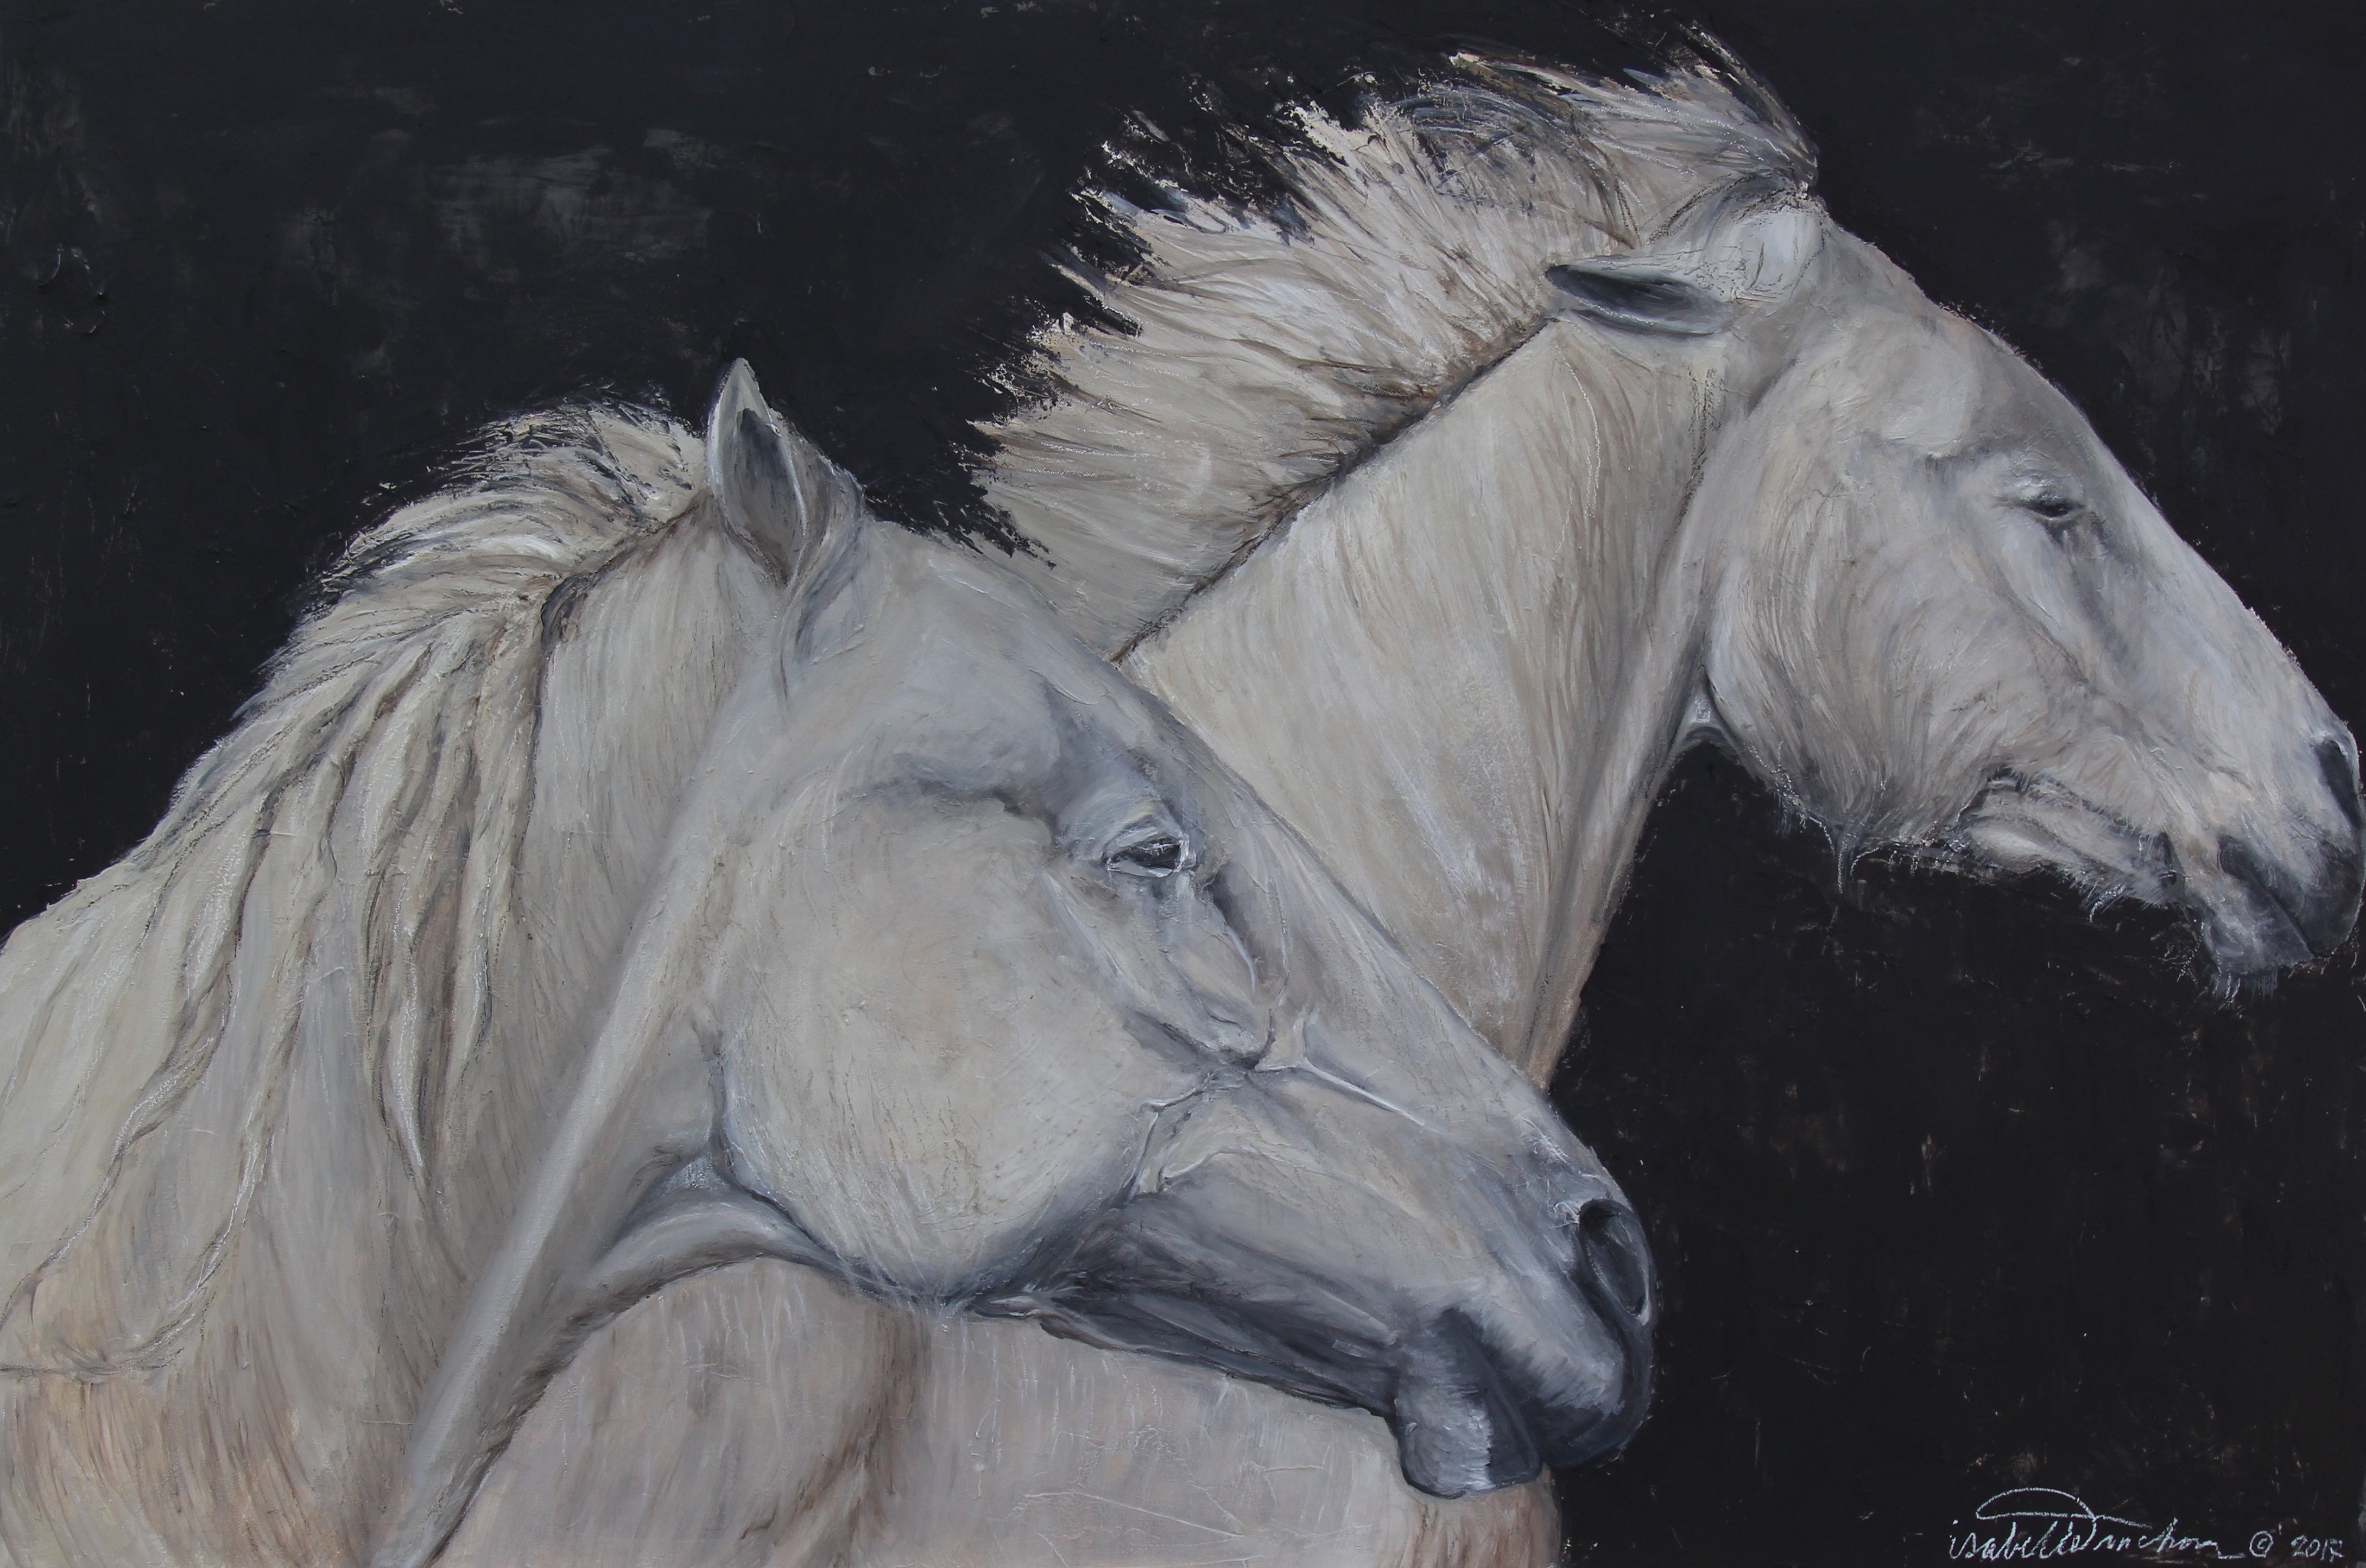 Artist Isabelle Truchon captures the mighty horses of the Camargue galloping in unison, happy to be alive in their beautiful natural habitat. This painting was created using oil sticks and is highly textured. The energy of the horses jumps from the canvas, a stunning and dramatic piece.